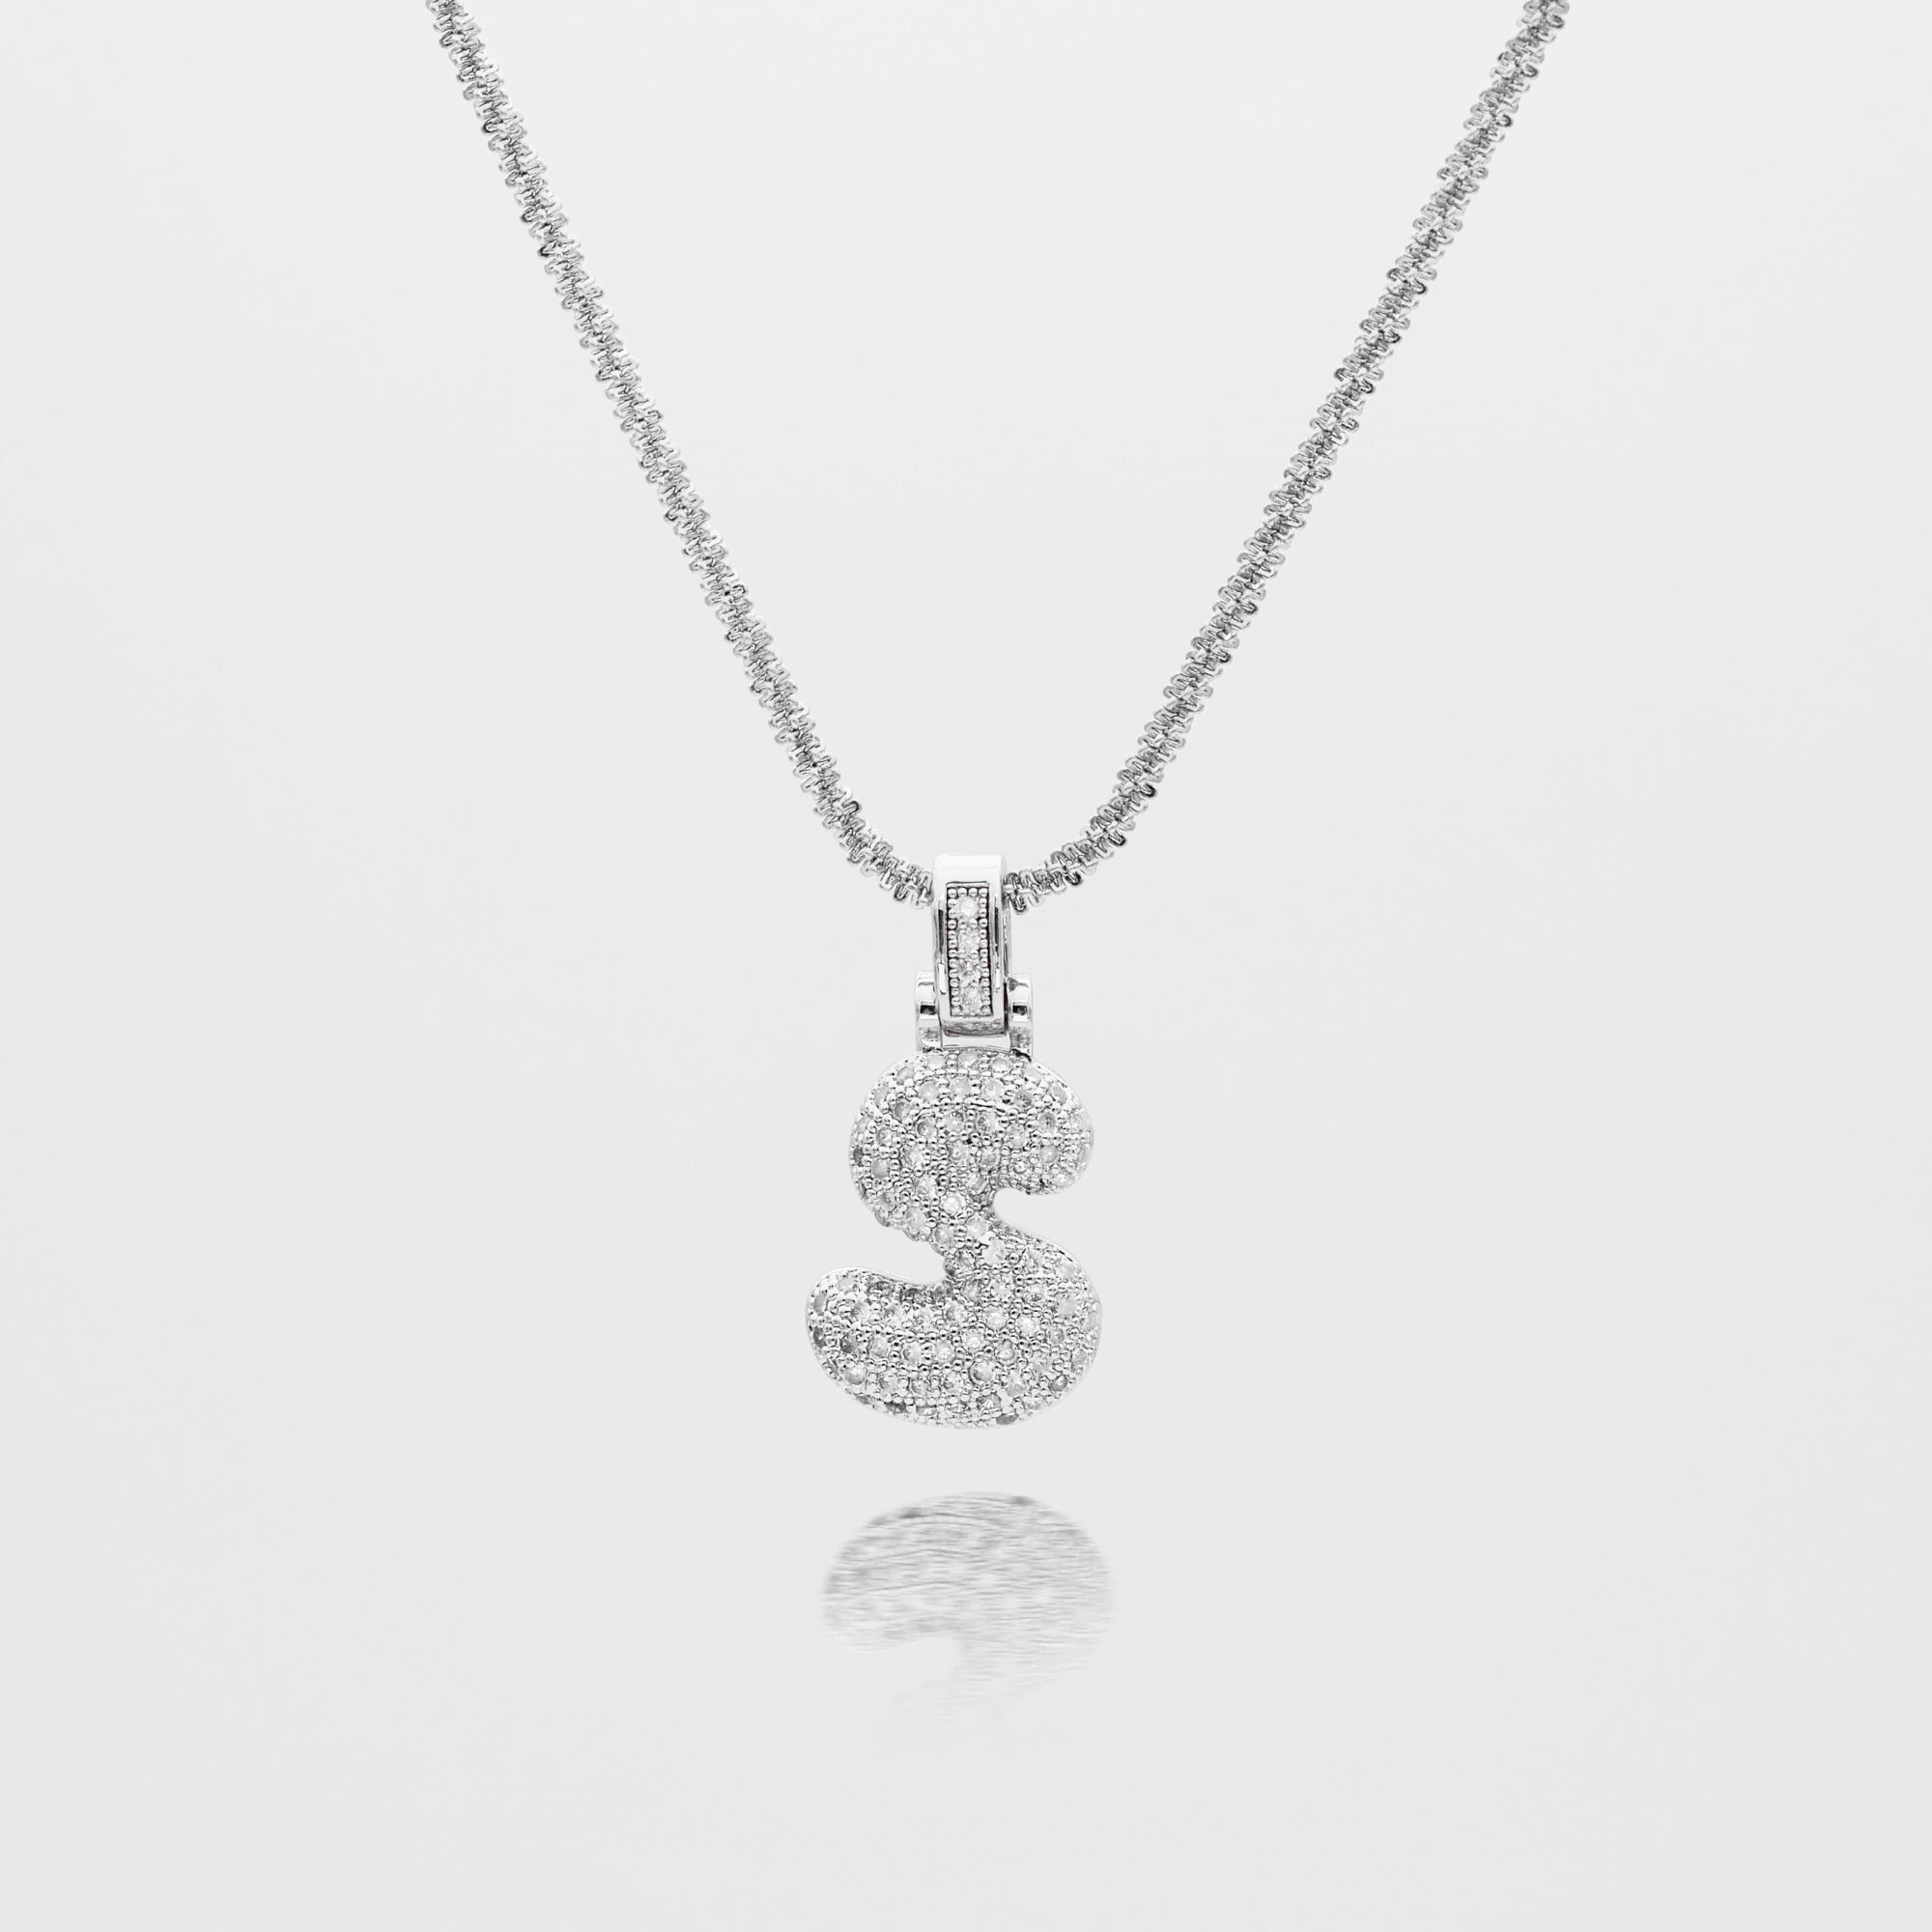 Pave Bubble Letter Initial Necklace encrusted with radiant CZ stones in silver tennis chain